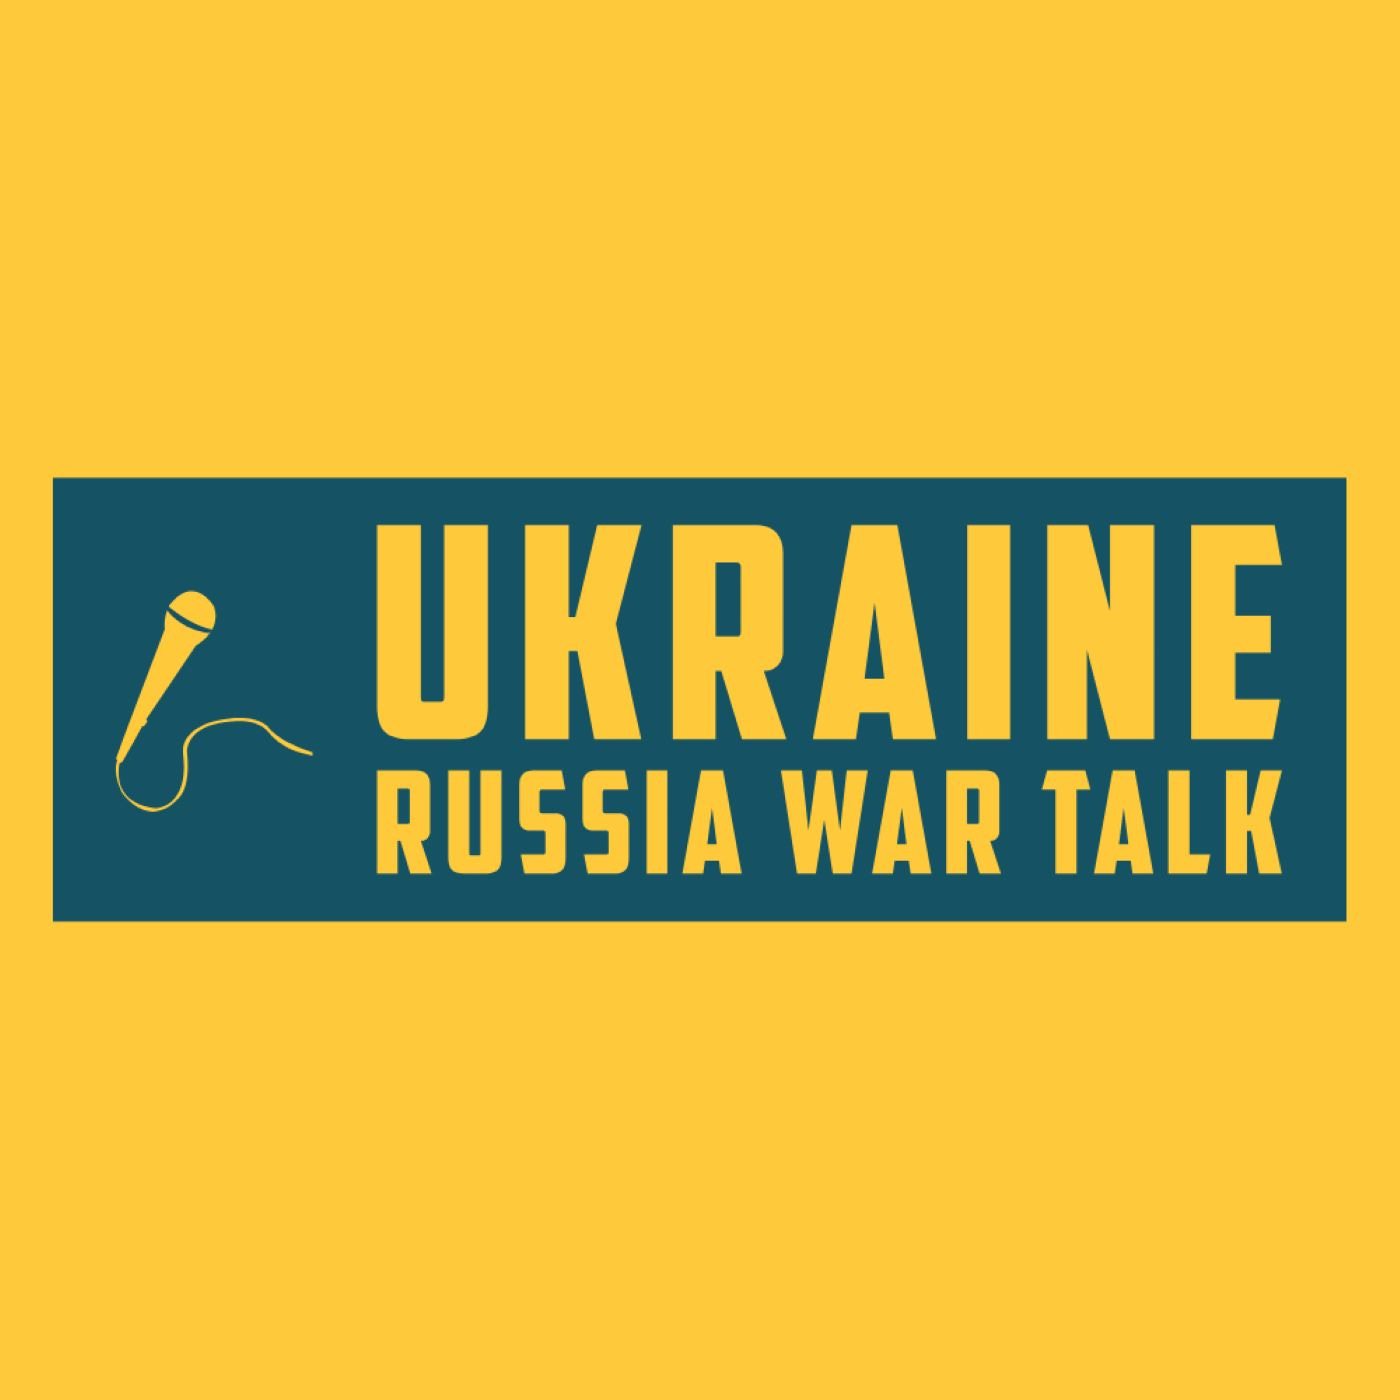 Episode 10: Situation on the Battlefield with Ukraine on the defensive